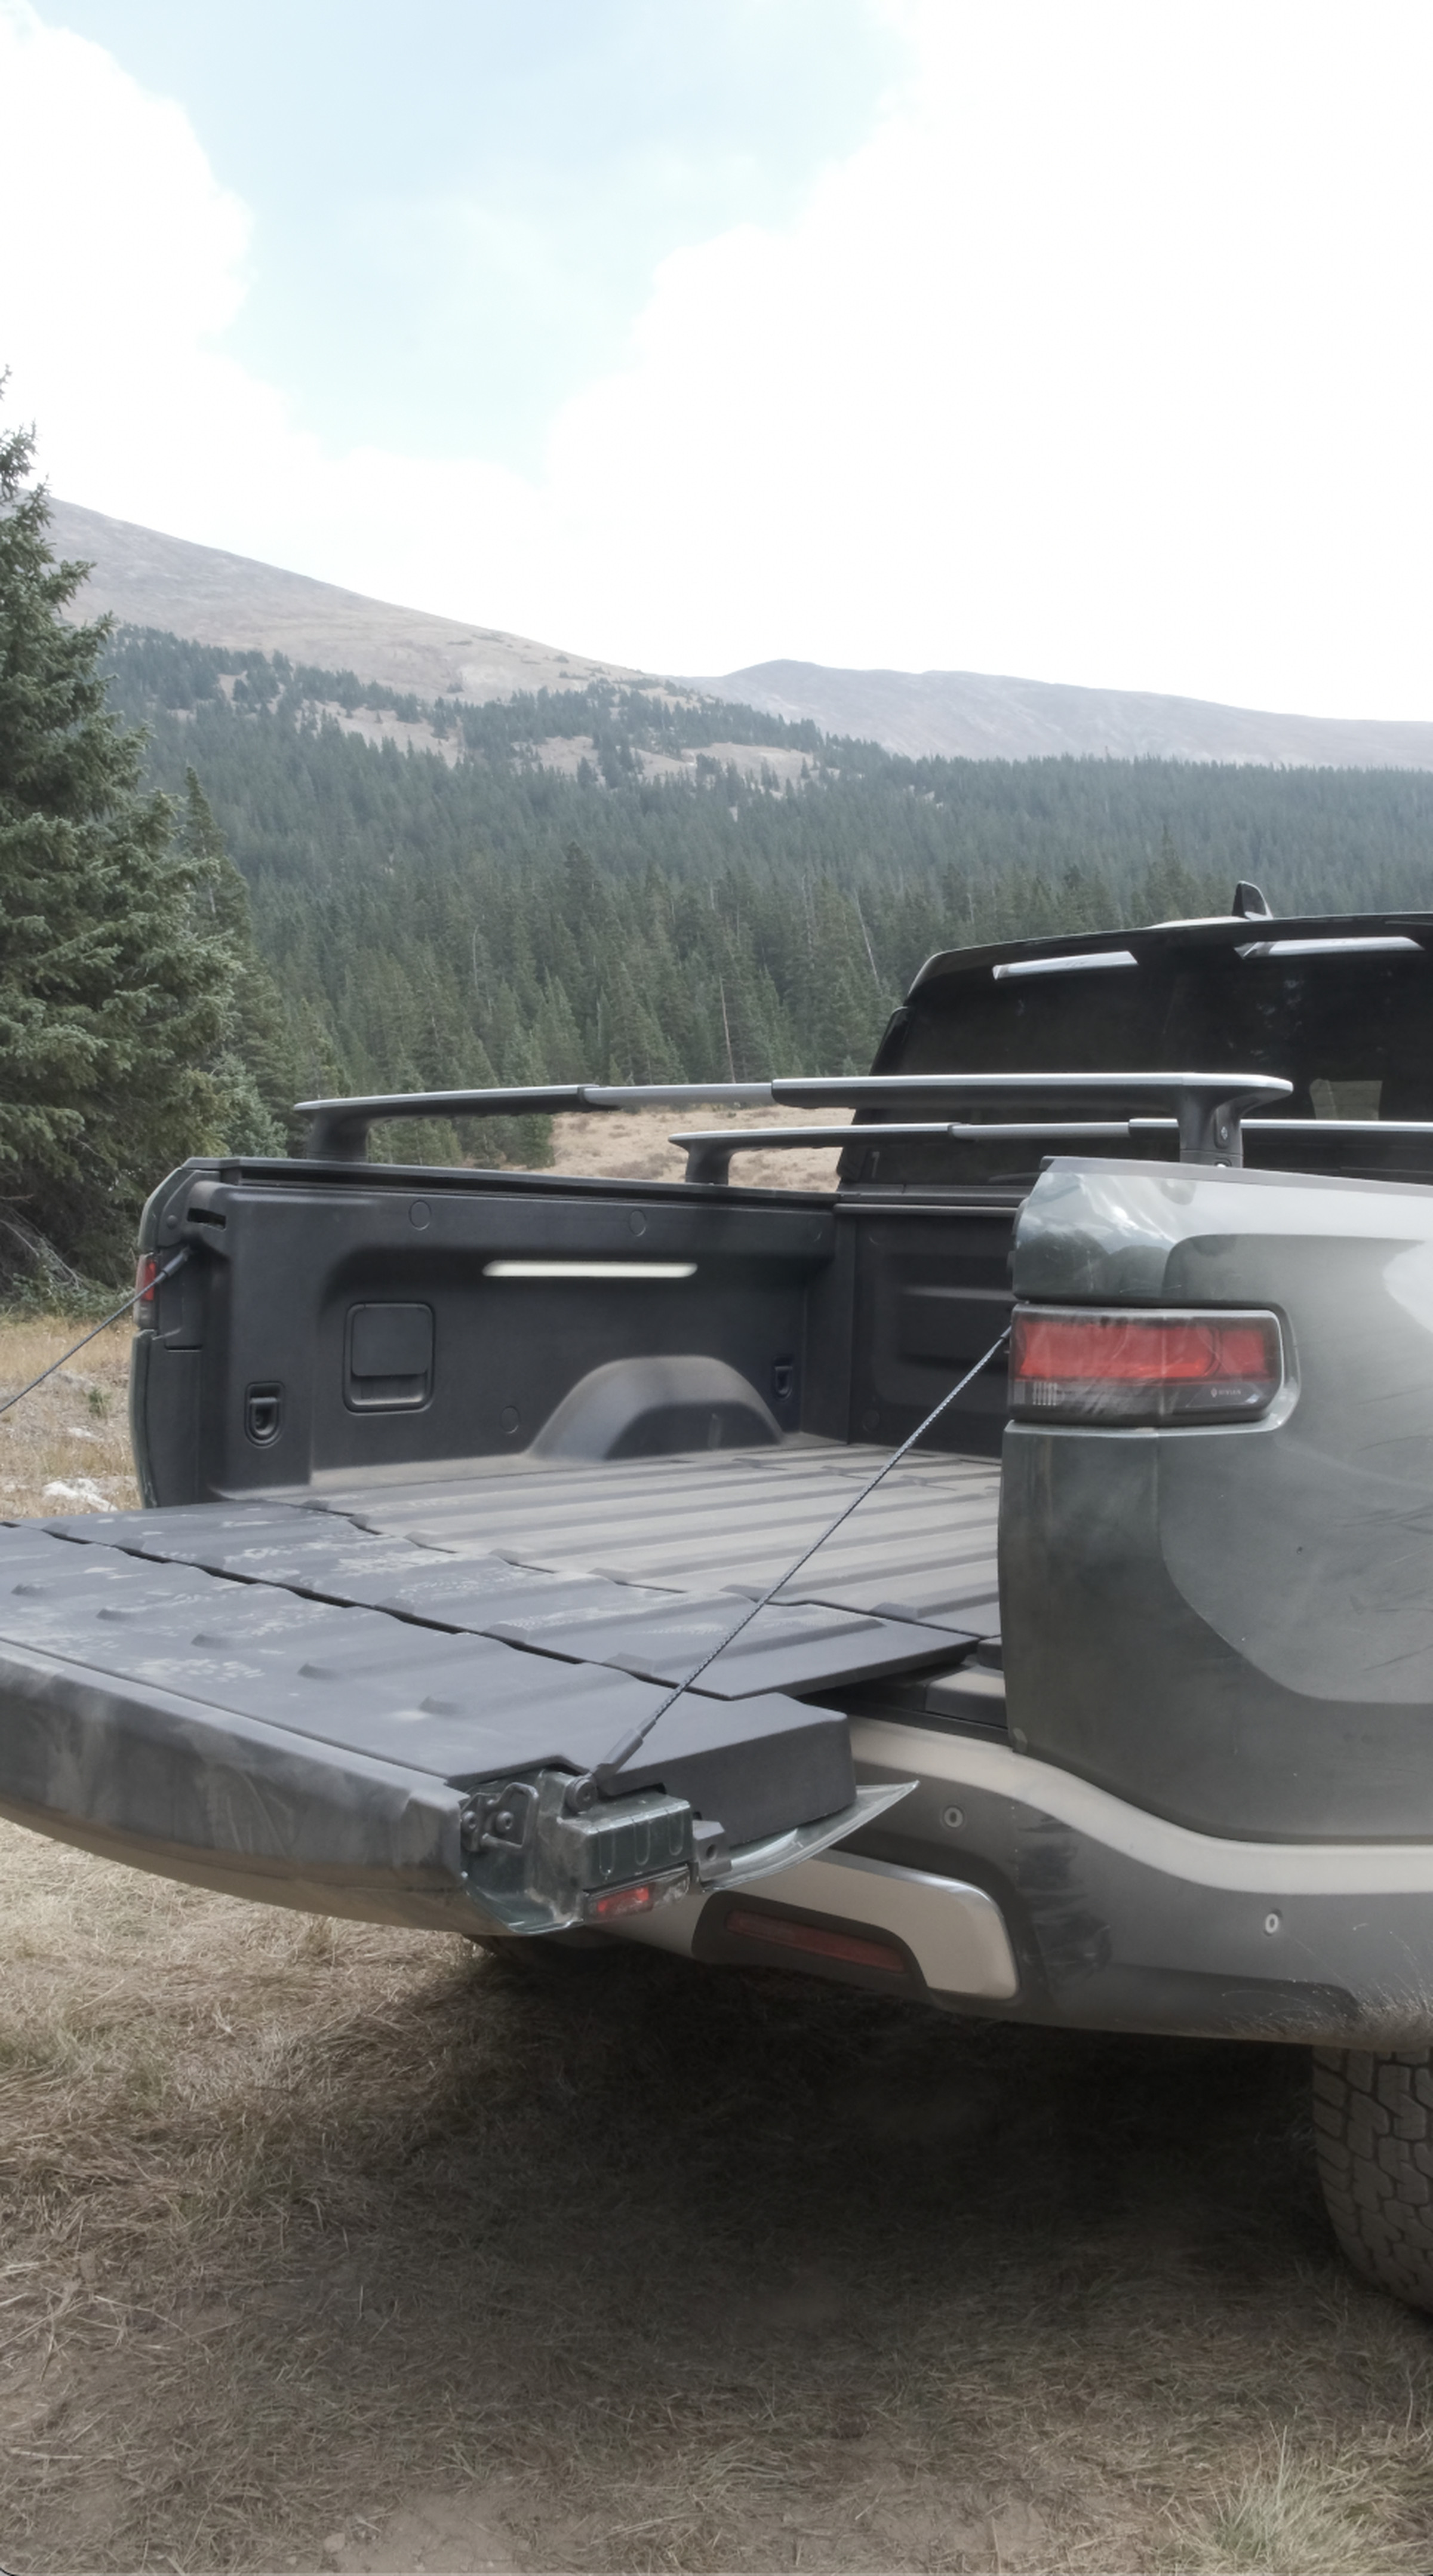 Rivian says the gooseneck hinge allows for the 4.5-foot long bed to be expanded to 83.6 inches.